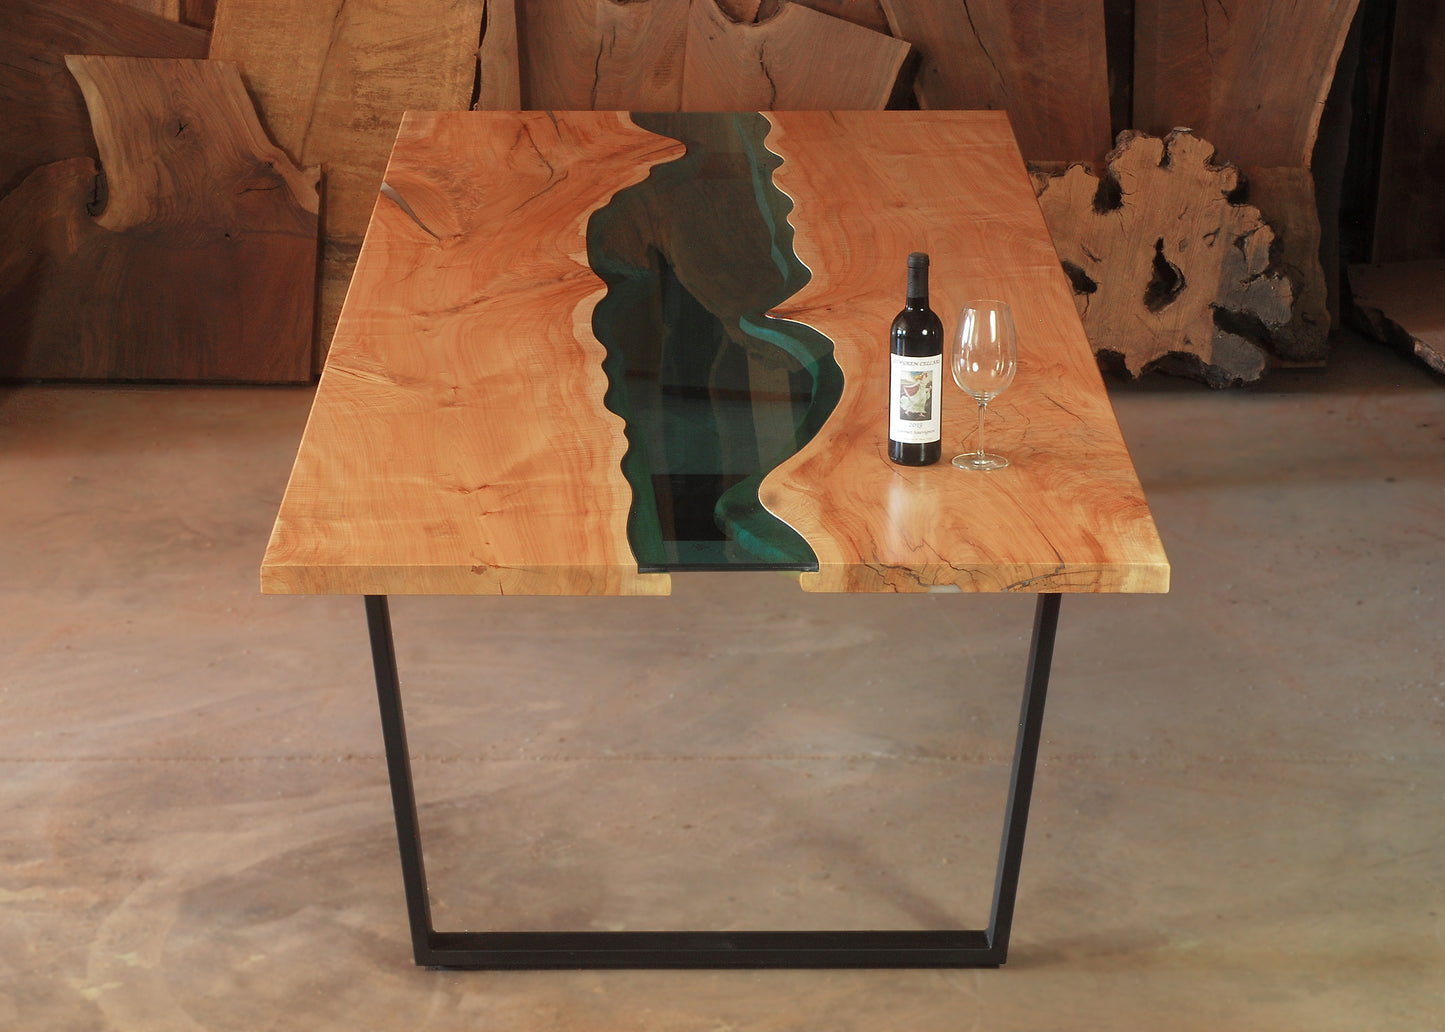 Resin River Tables by Highland Haus Epoxy - GlassCast